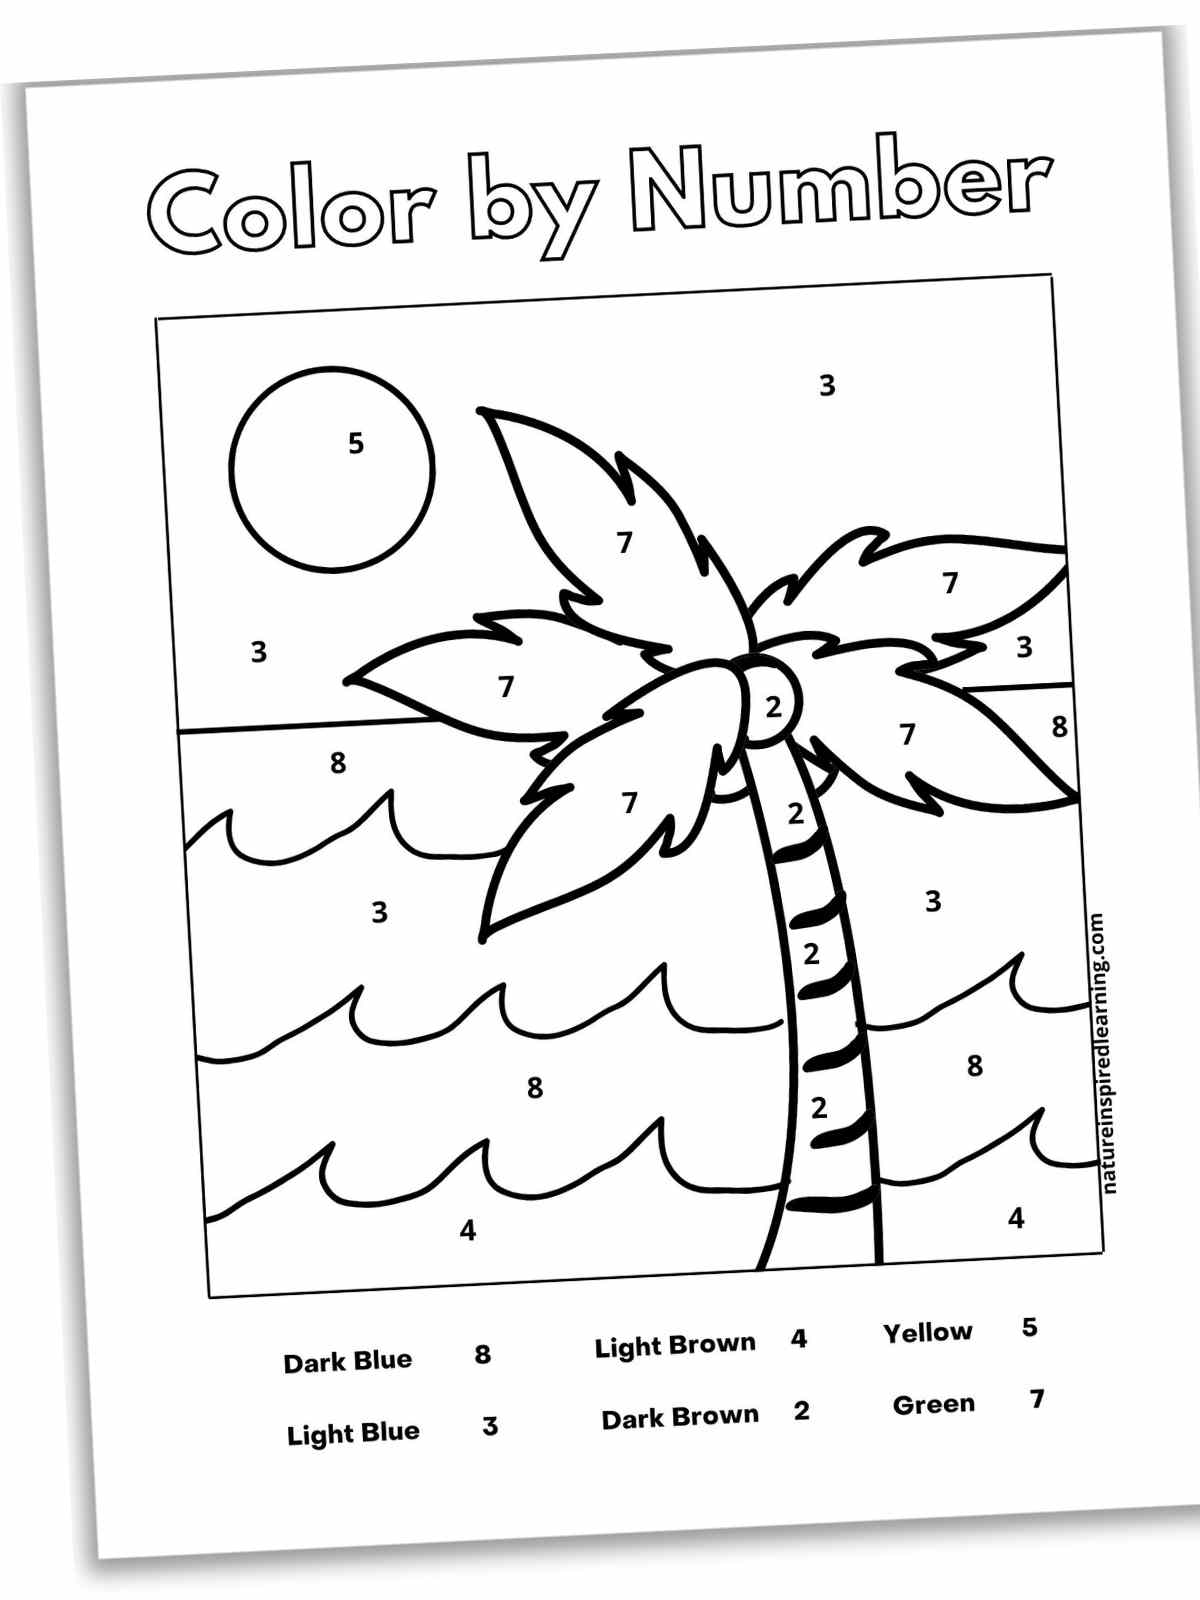 black and white worksheet with a palm tree, sun, ocean waves, and beach with a color key and title slanted with a drop shadow.